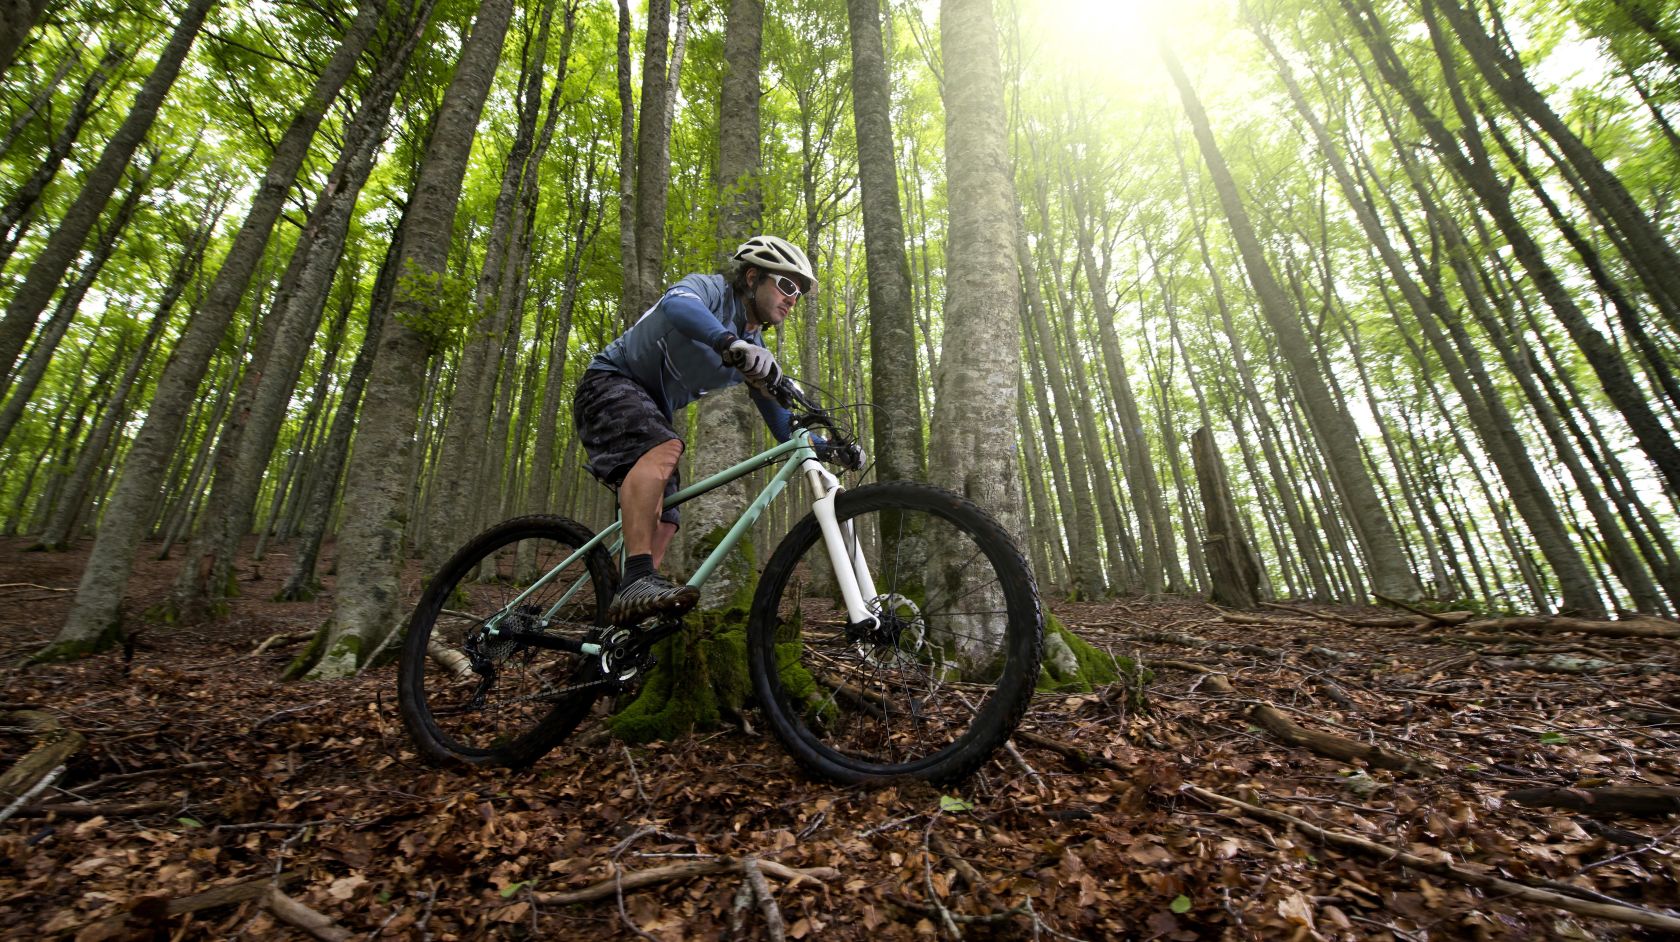 A Man Riding A Bicycle On A Dirt Path In A Wooded Area